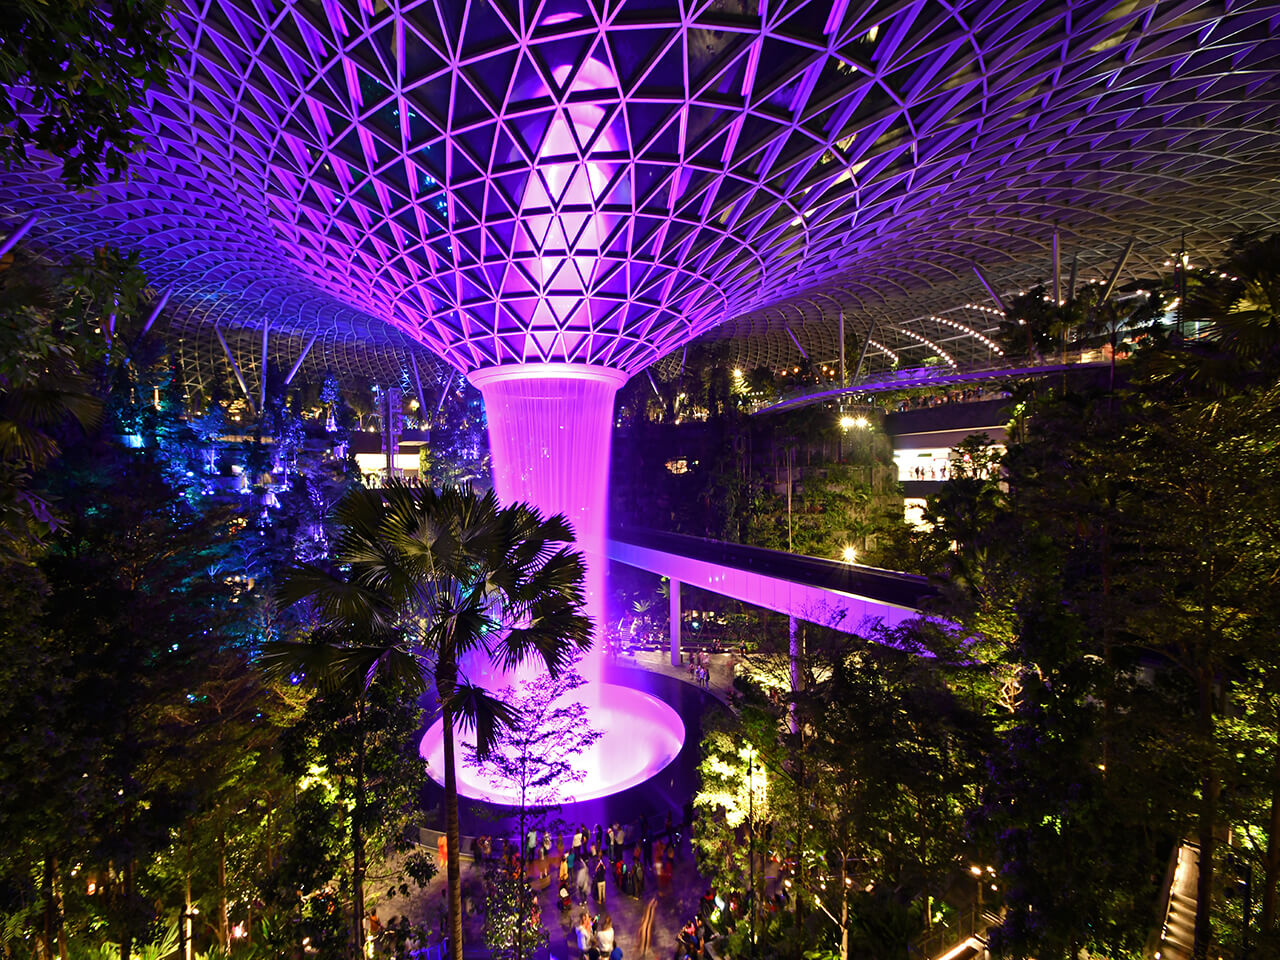 6. Visiting Singapore Changi Airport is breezy